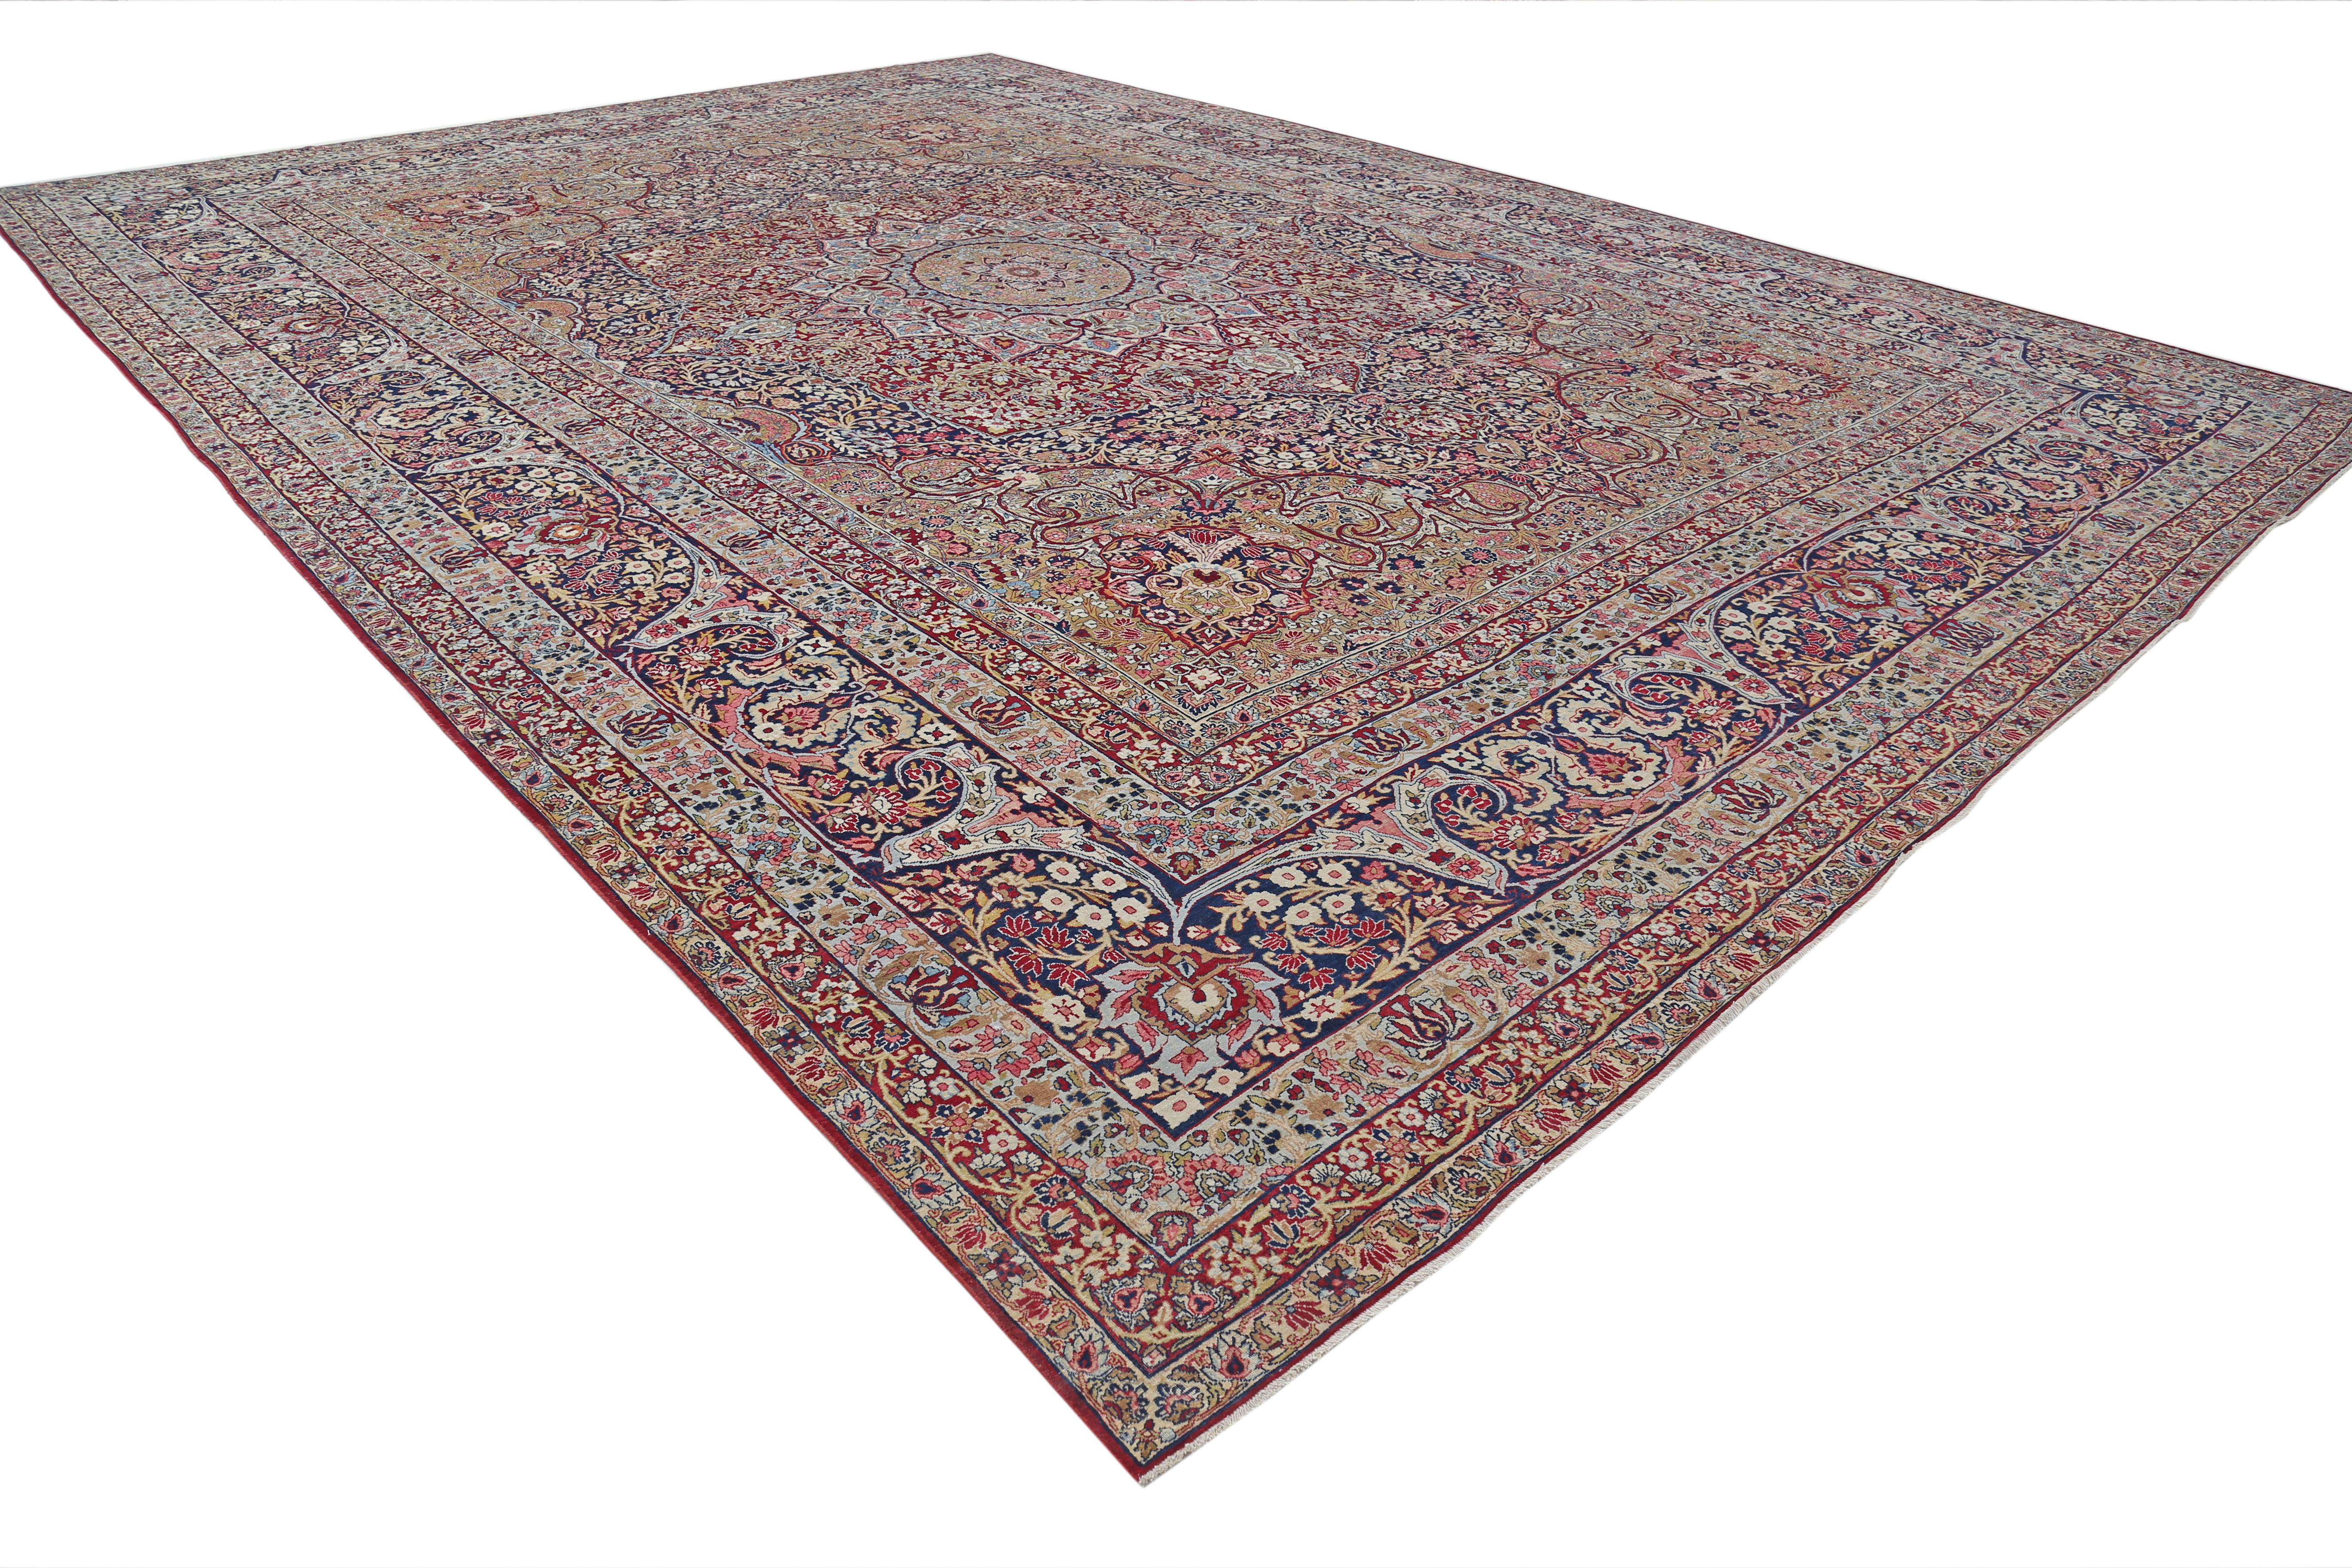 A stunning gorgeous antique KirmanShah/ Laver Kirman carpet. Orignated From Iran in the late 19th century, this carpet is in excellent condition considering it’s rich history. 